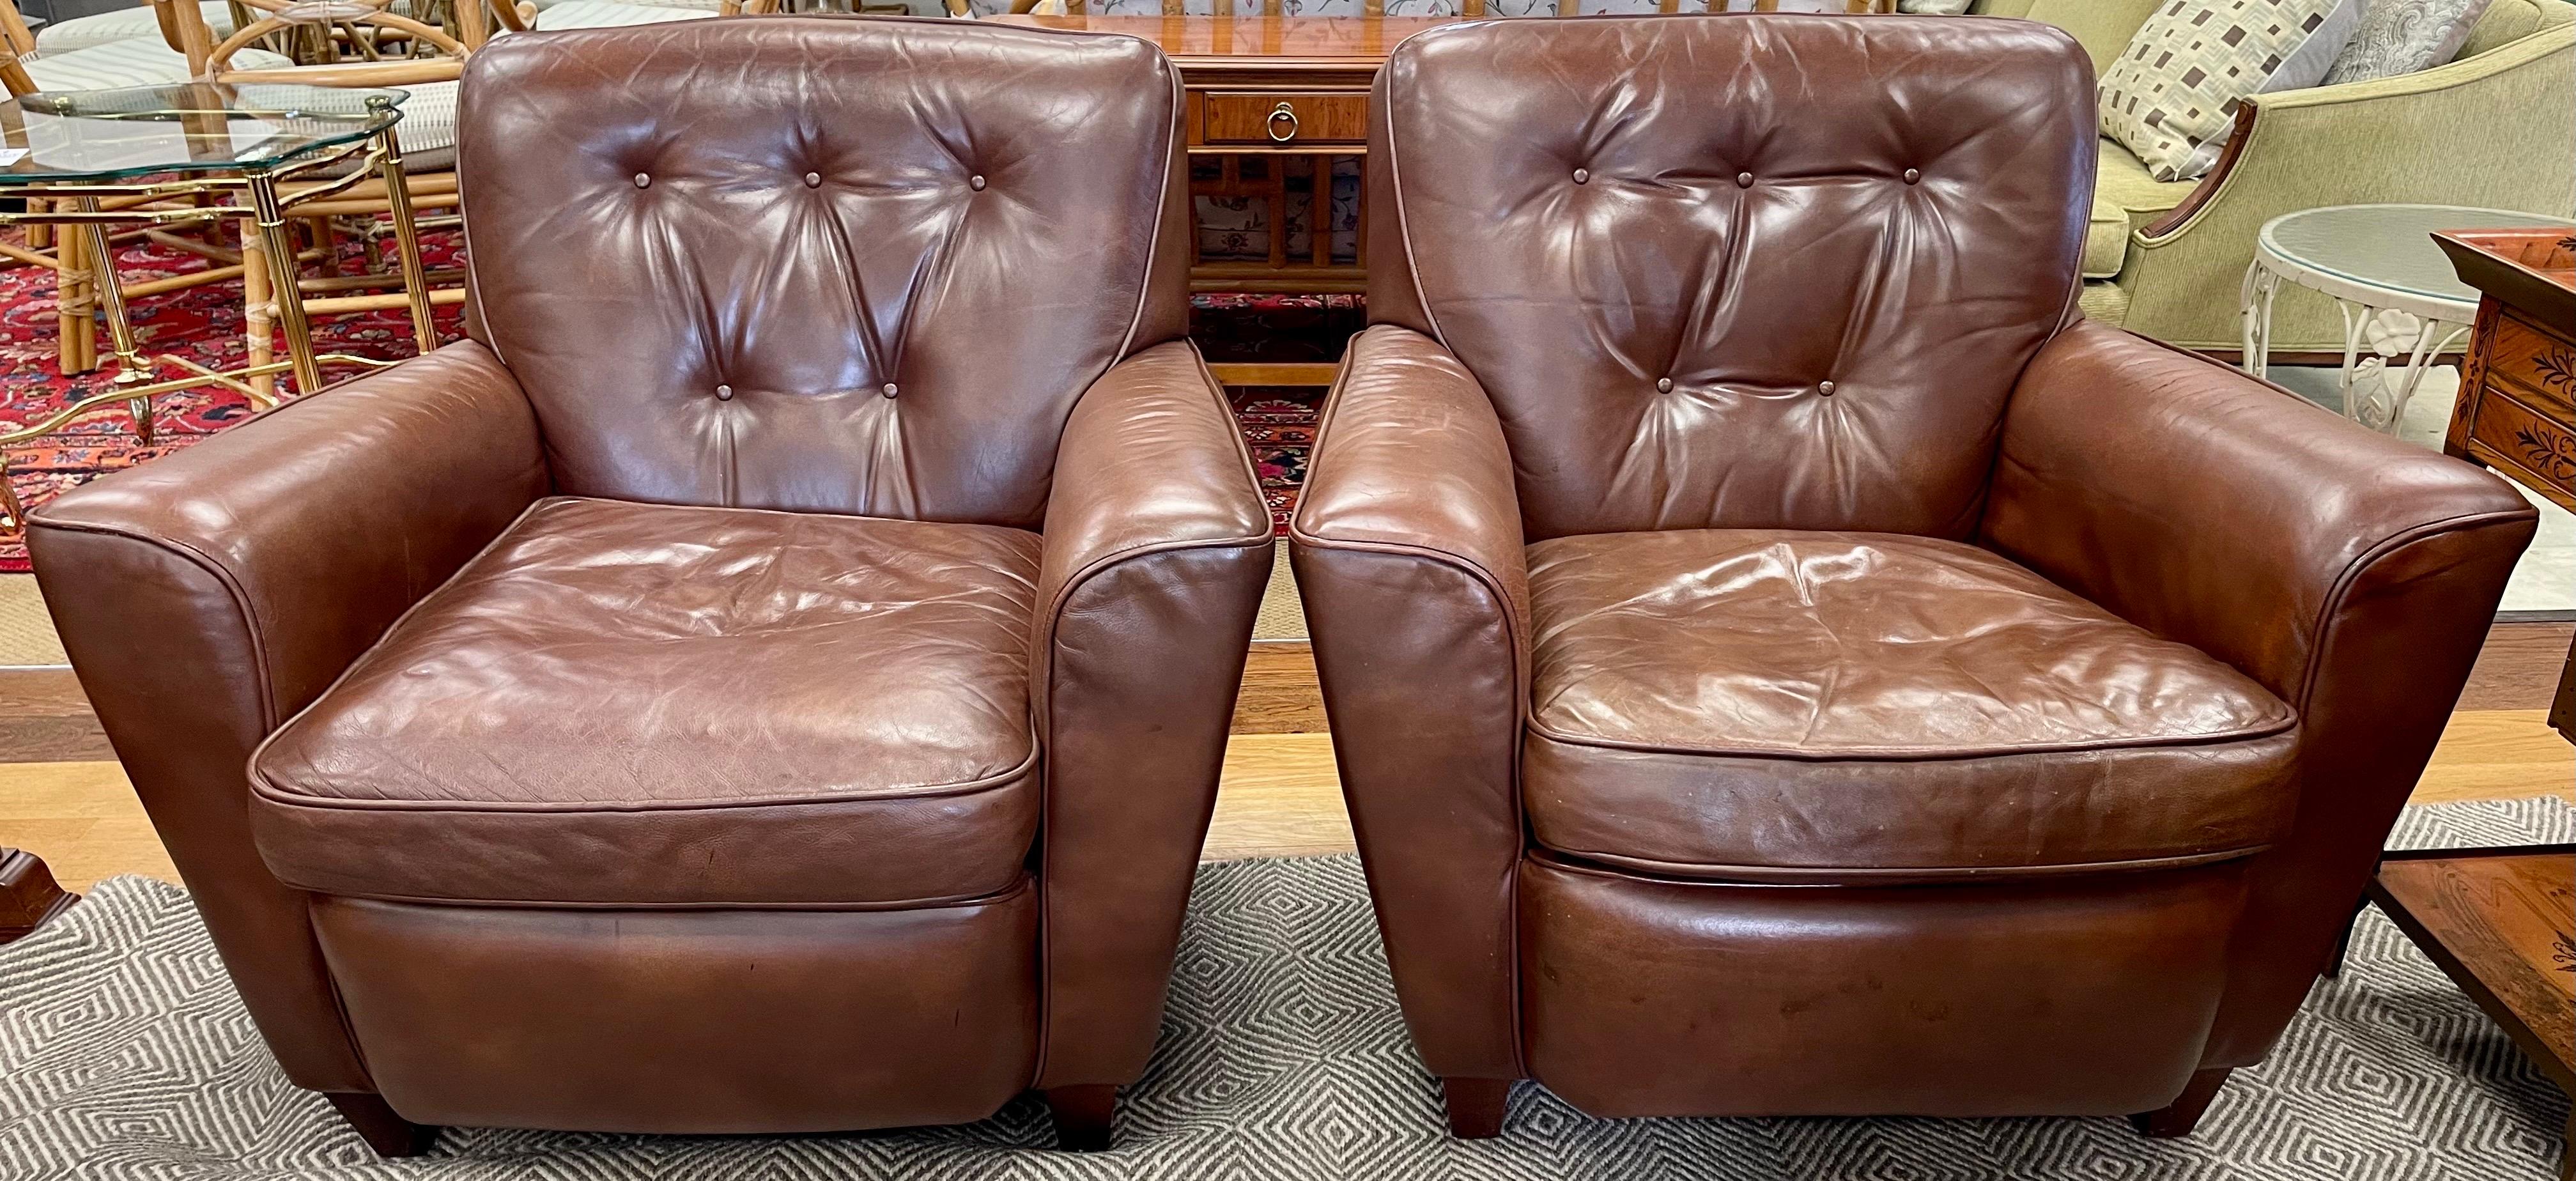 Elegant pair of brown leather club chairs with tufted backs by US leather/furniture company Bradington Young.  Perfect patina, perfect comfort, better lines!
Seat height is 17.5